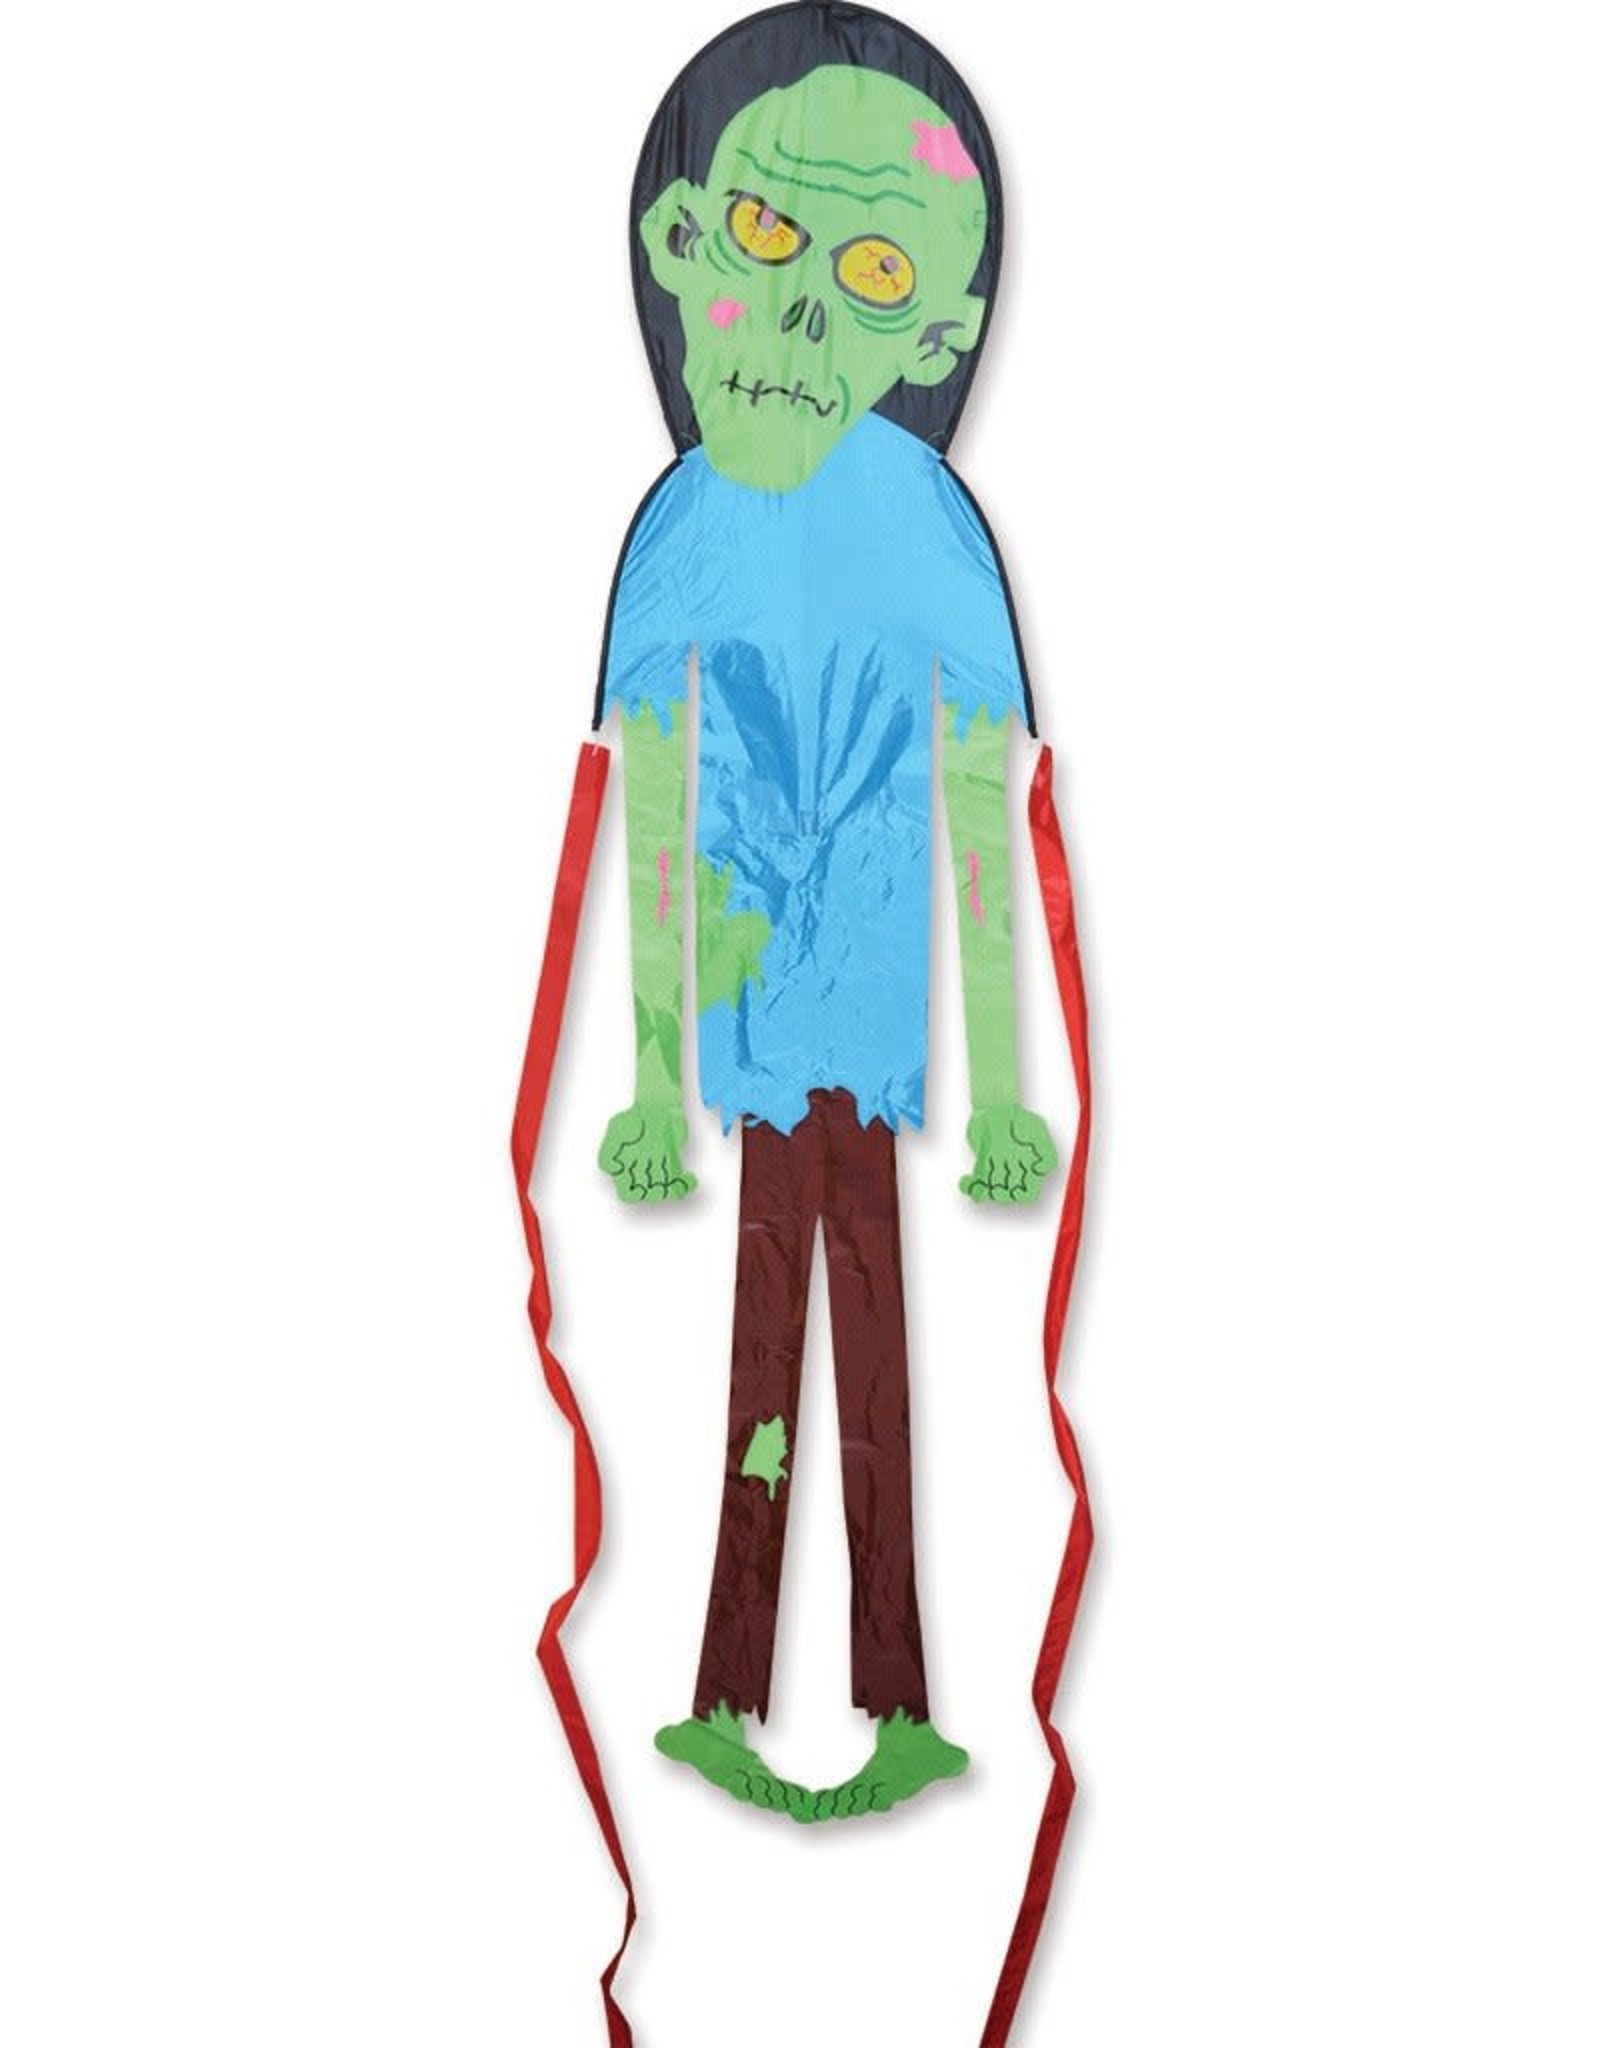 Premier Kites ZOMBIE KITE  *Not available for shipping. Pick up only.